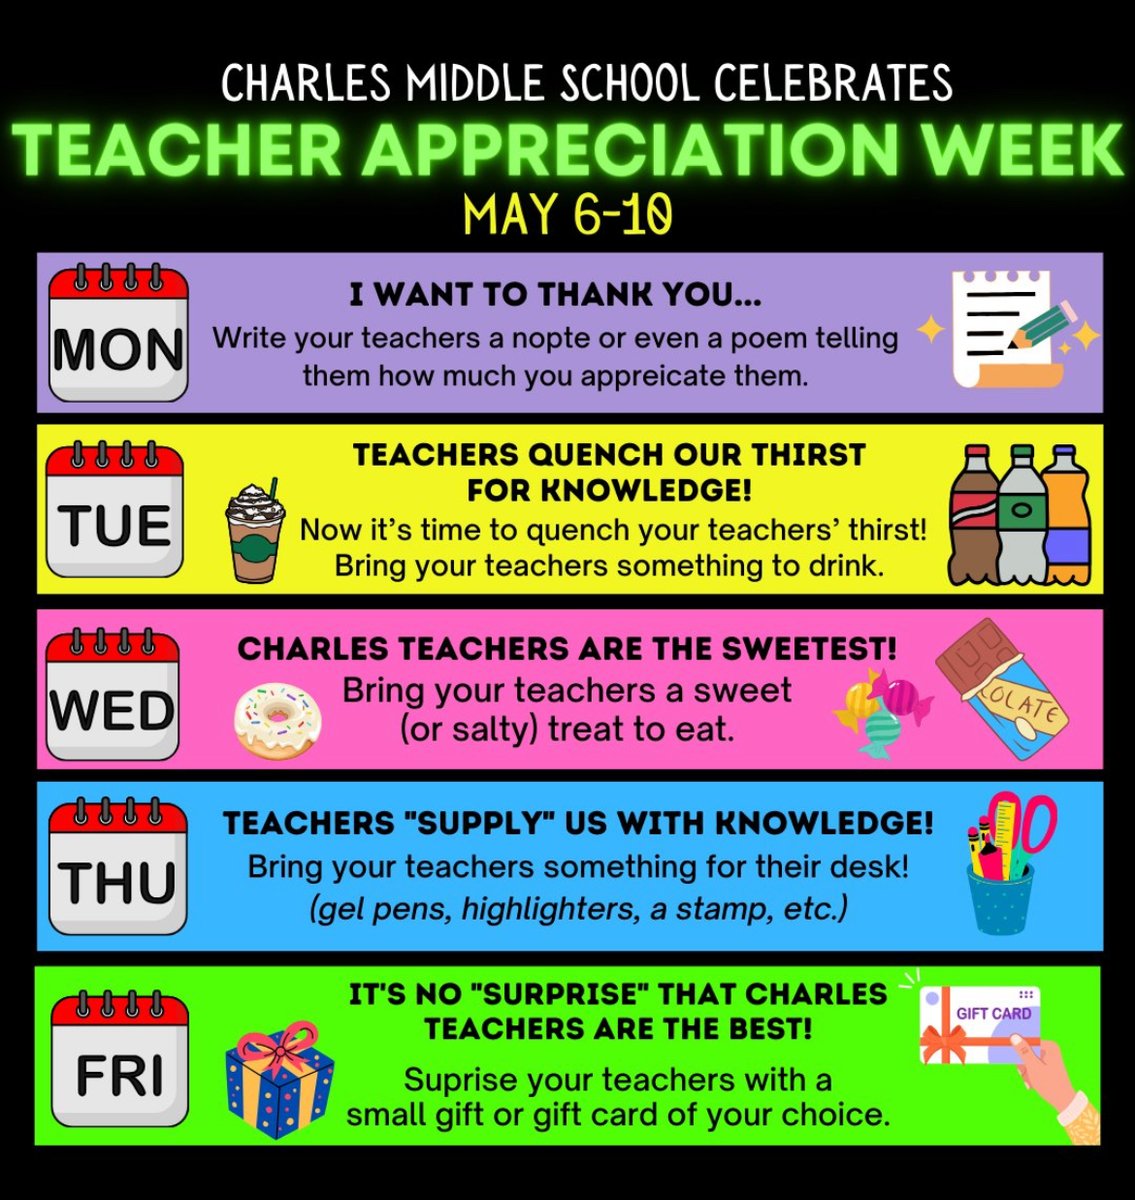 Check out CMS Weekly (via secure.smore.com) secure.smore.com/n/bwpsu #itstartswithus @ElPaso_ISD @CharlesChargers